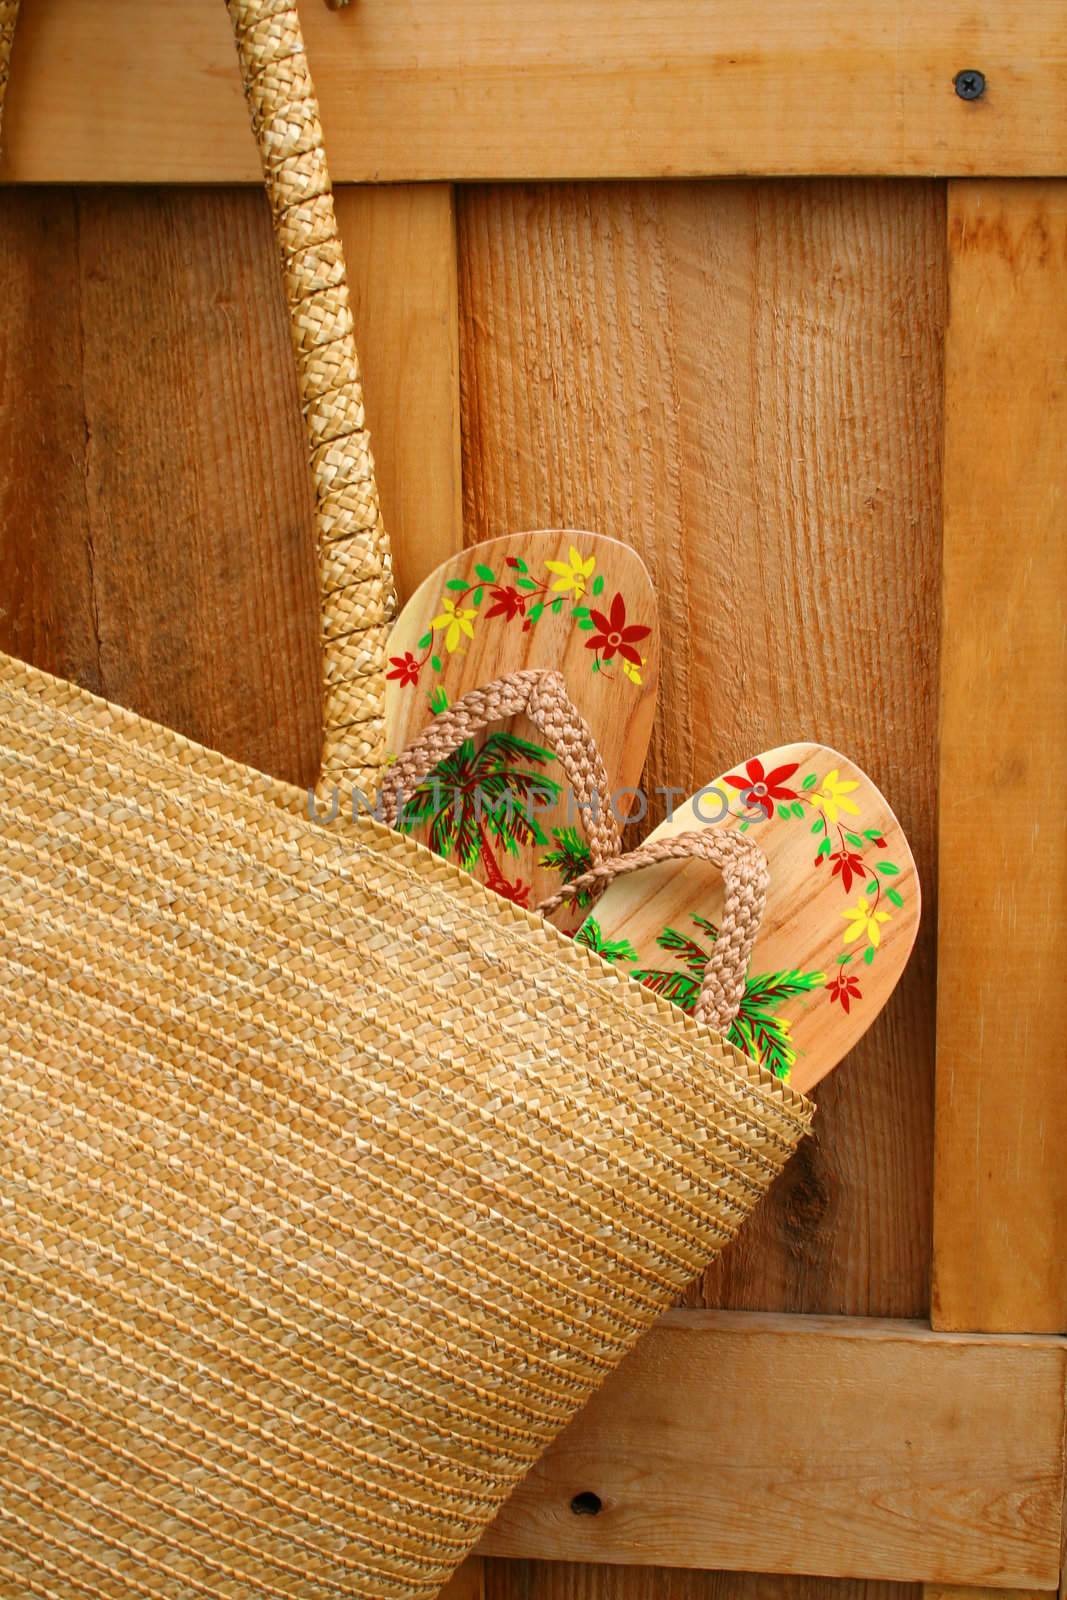 Pair of sandals hanging out of wicker purse by Sandralise